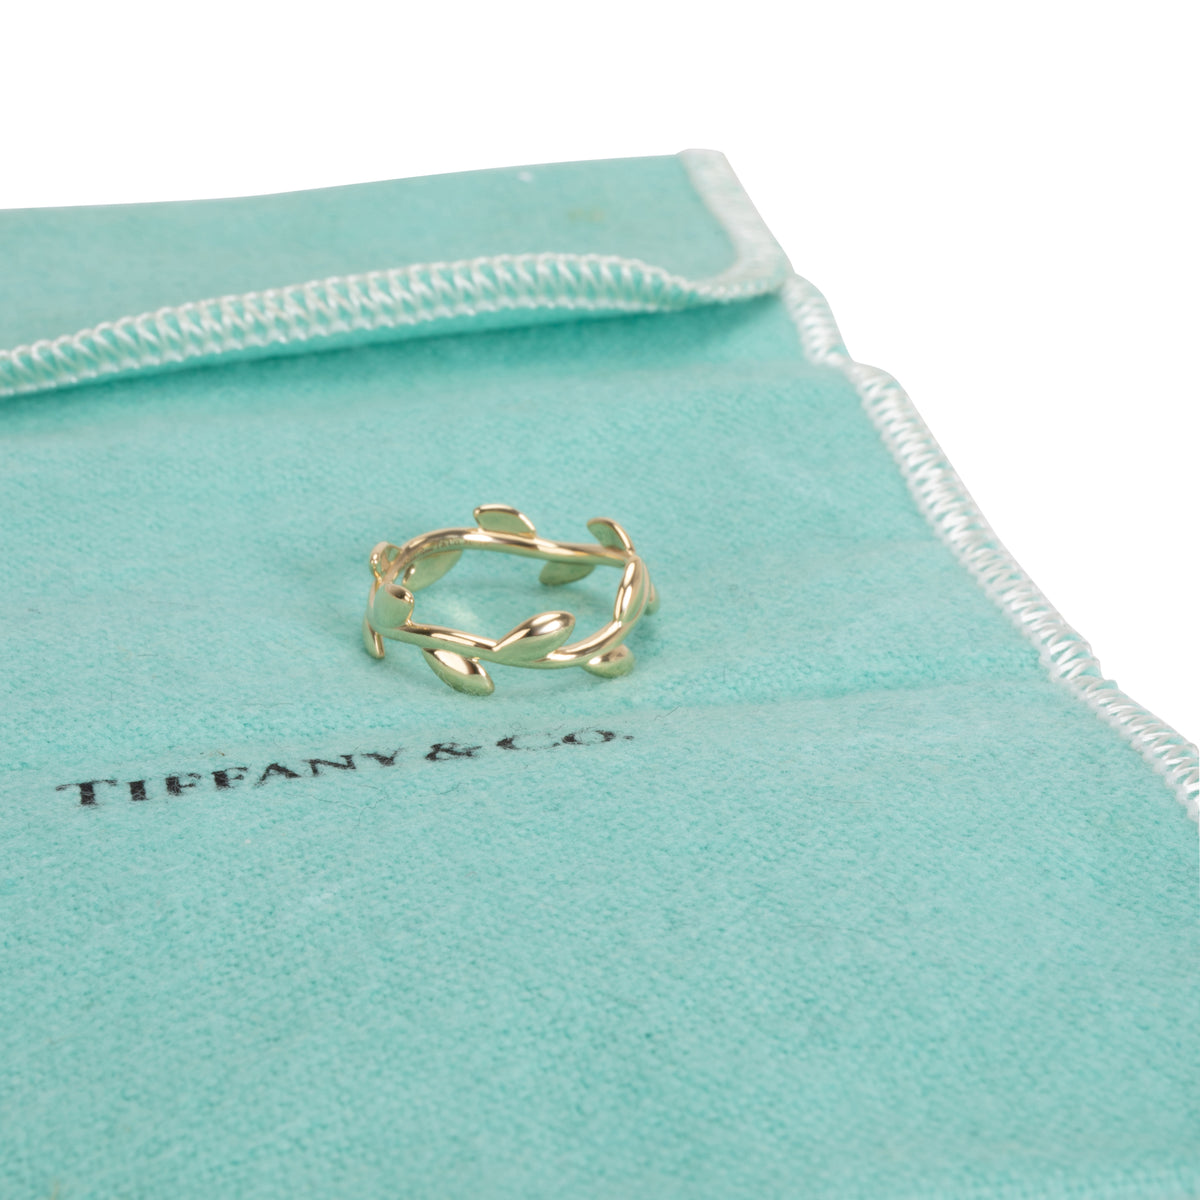 Tiffany & Co. Paloma Picasso Olive Vine Ring in 18K Yellow Gold